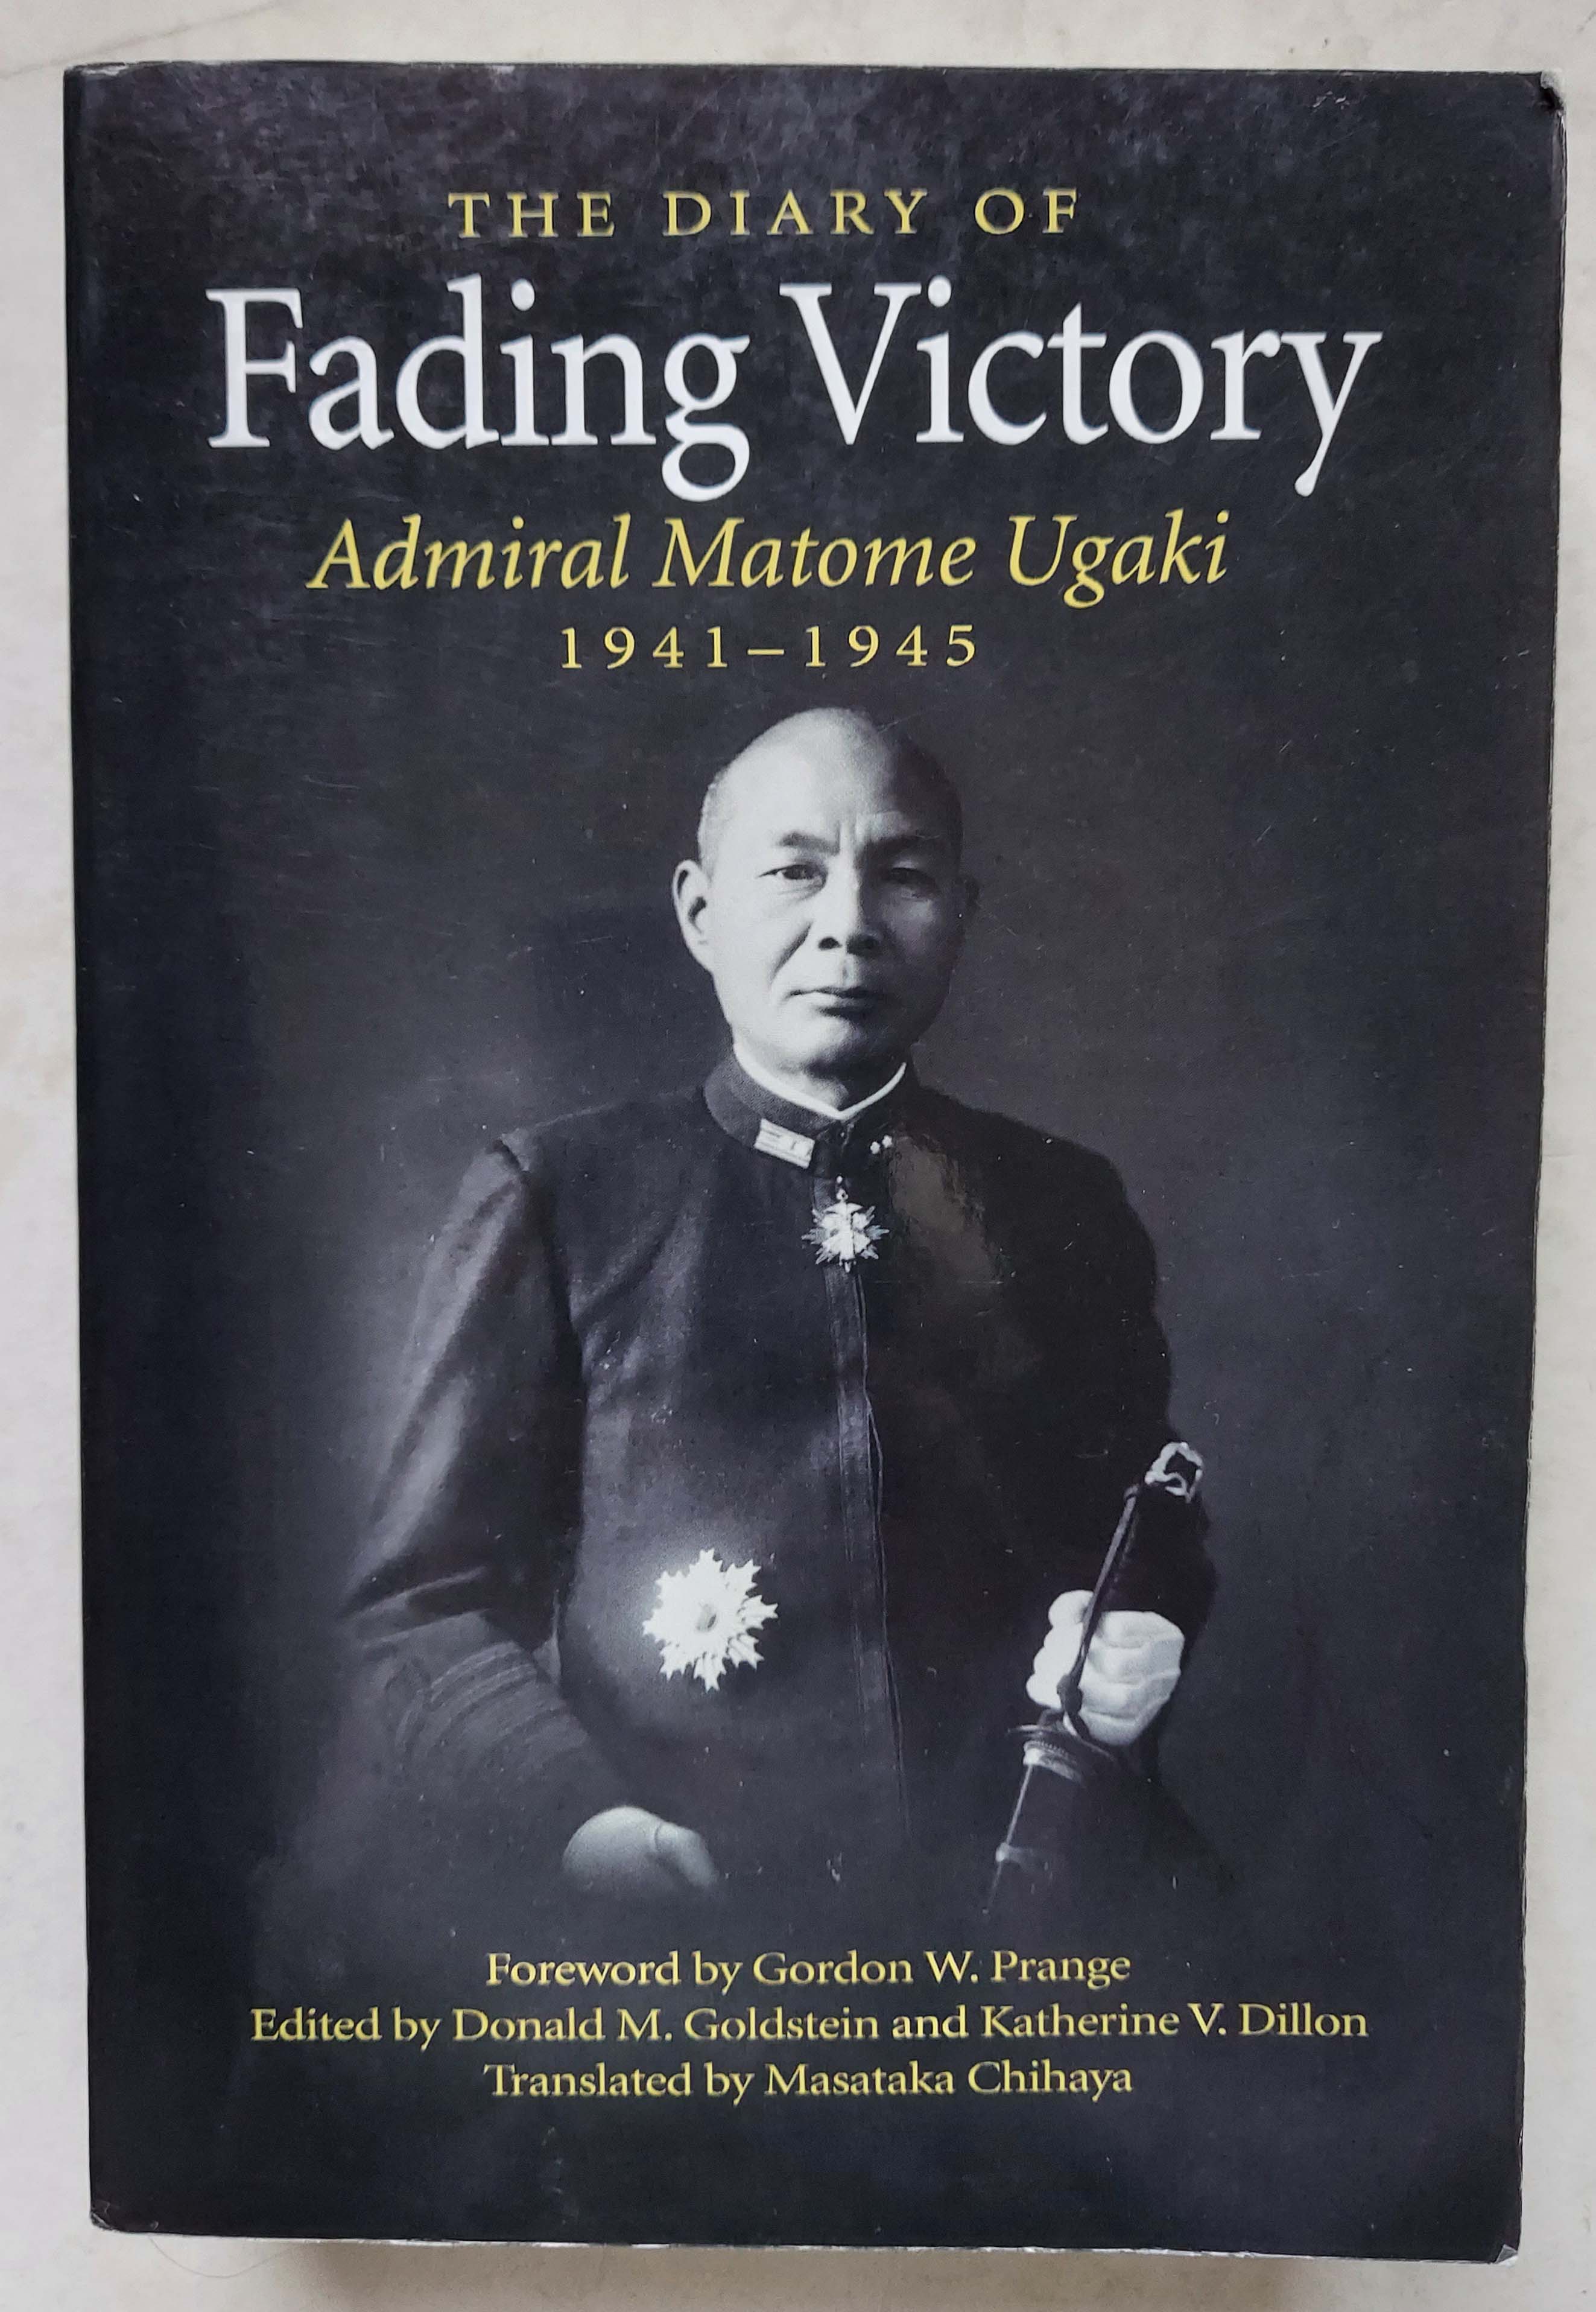 Fading Victory: The Diary of Admiral Matome Ugaki, 1941-1945 - Donald M. Goldstein and Katherine V. Dillon (Editors)